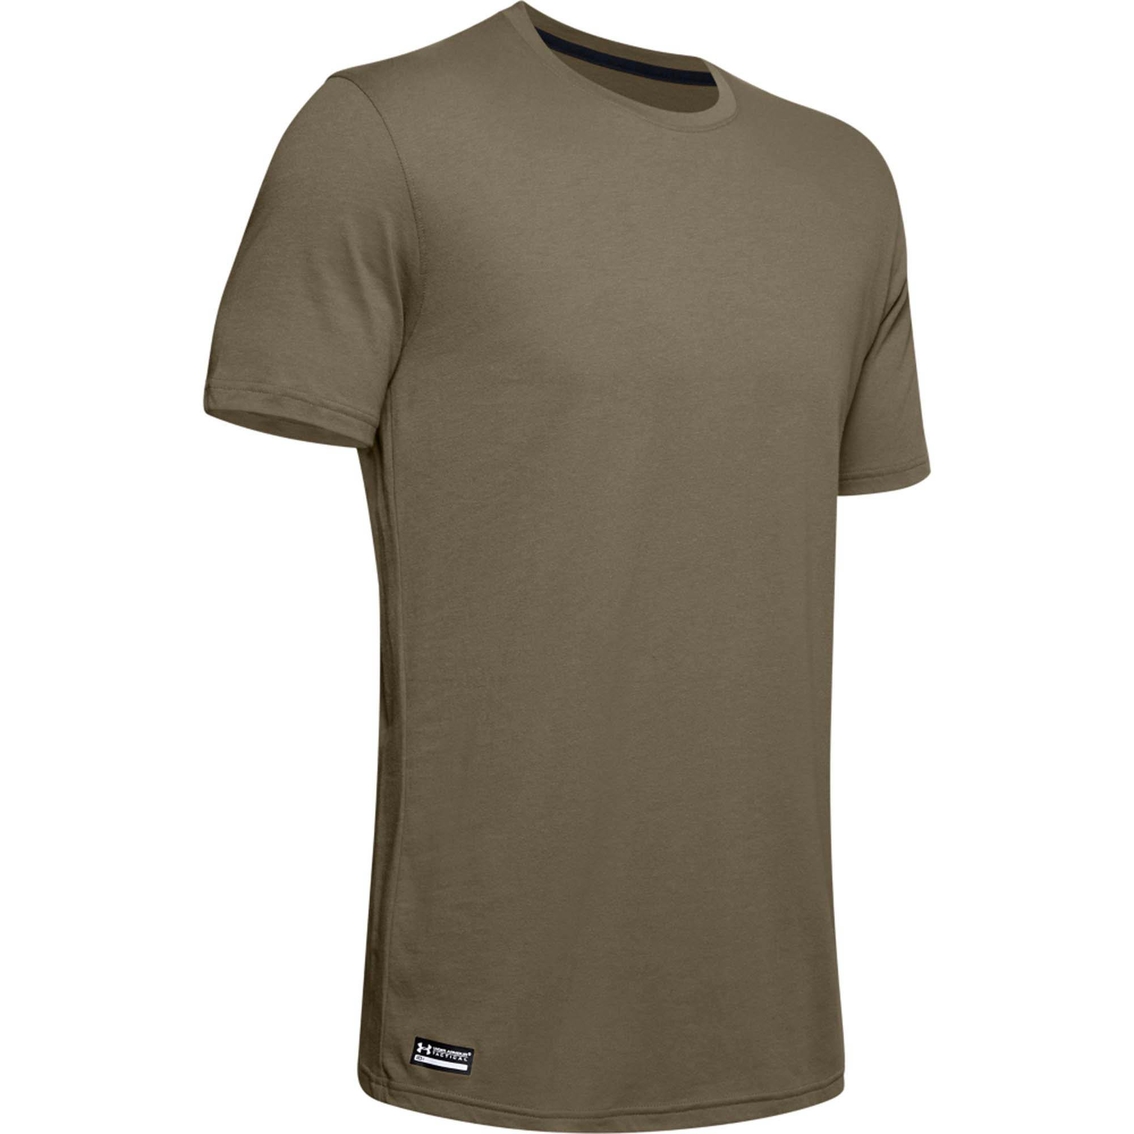 Under Armour M Tac Cotton Tee - Image 5 of 6